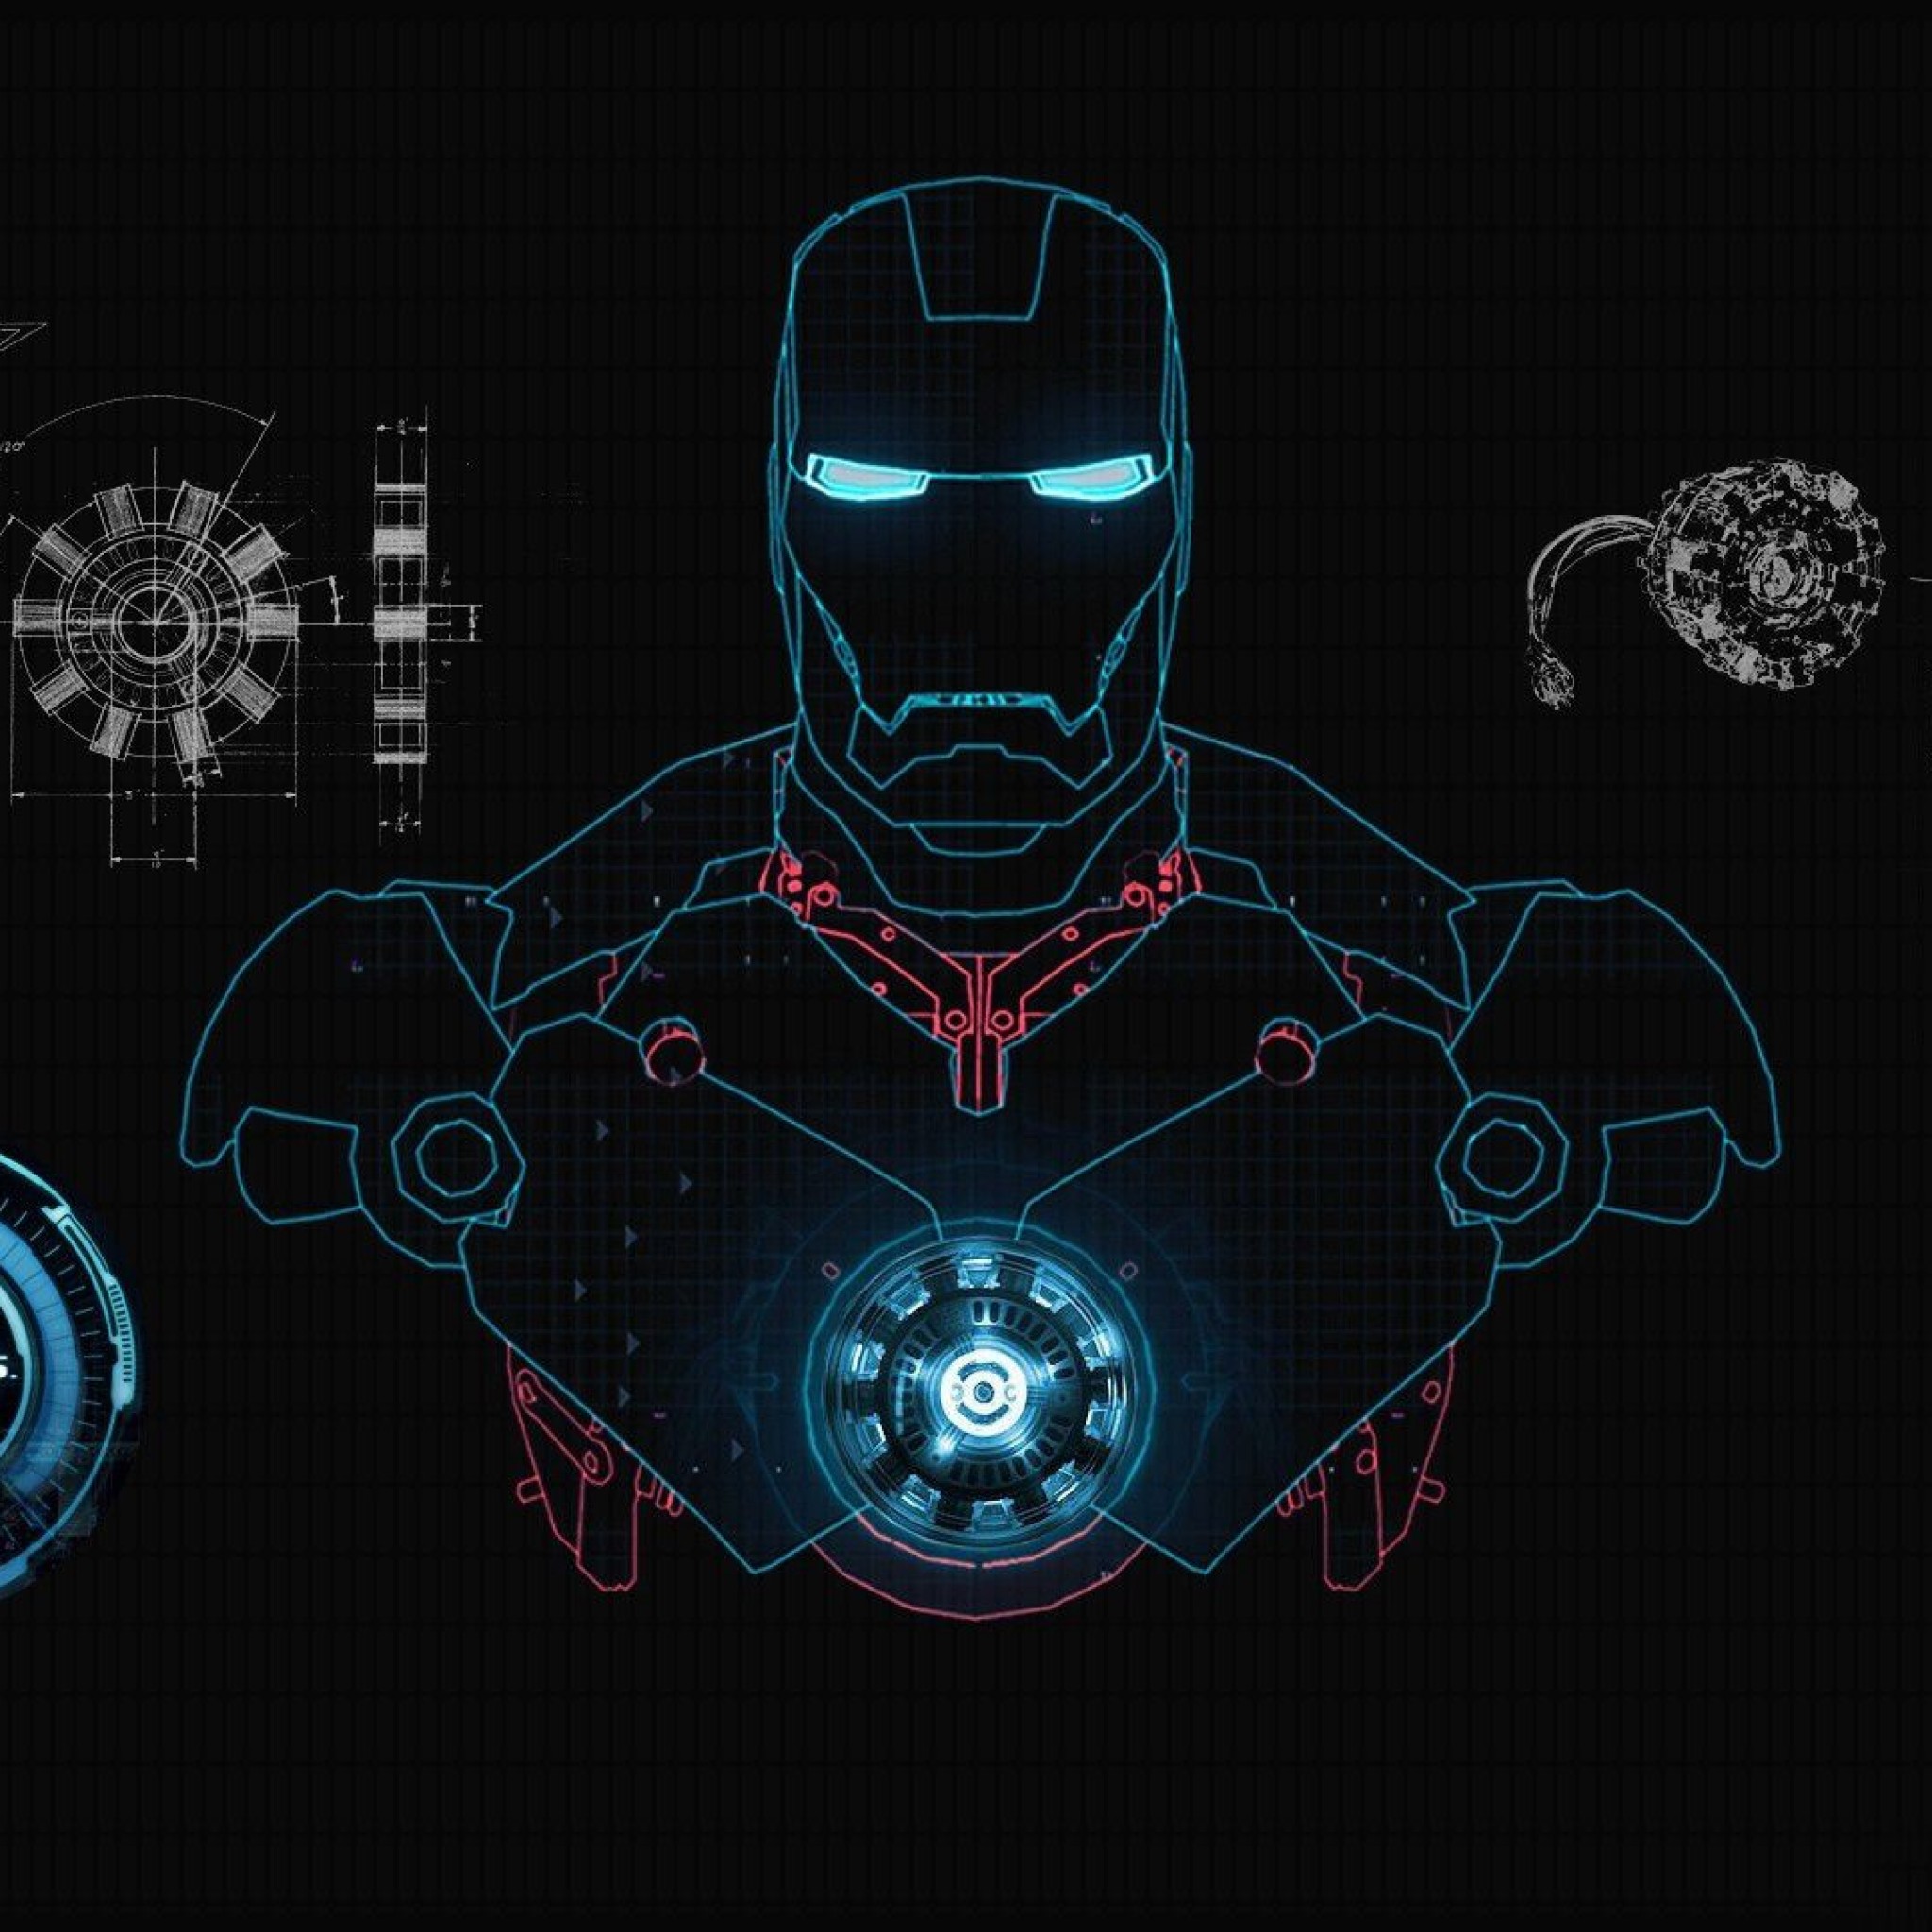 Free Download Iron Man Wallpaper Jarvis At Movies Wallpapers 1080p Hd 48x48 For Your Desktop Mobile Tablet Explore 48 Jarvis Iron Man Wallpaper Iron Man 3d Wallpaper Iron